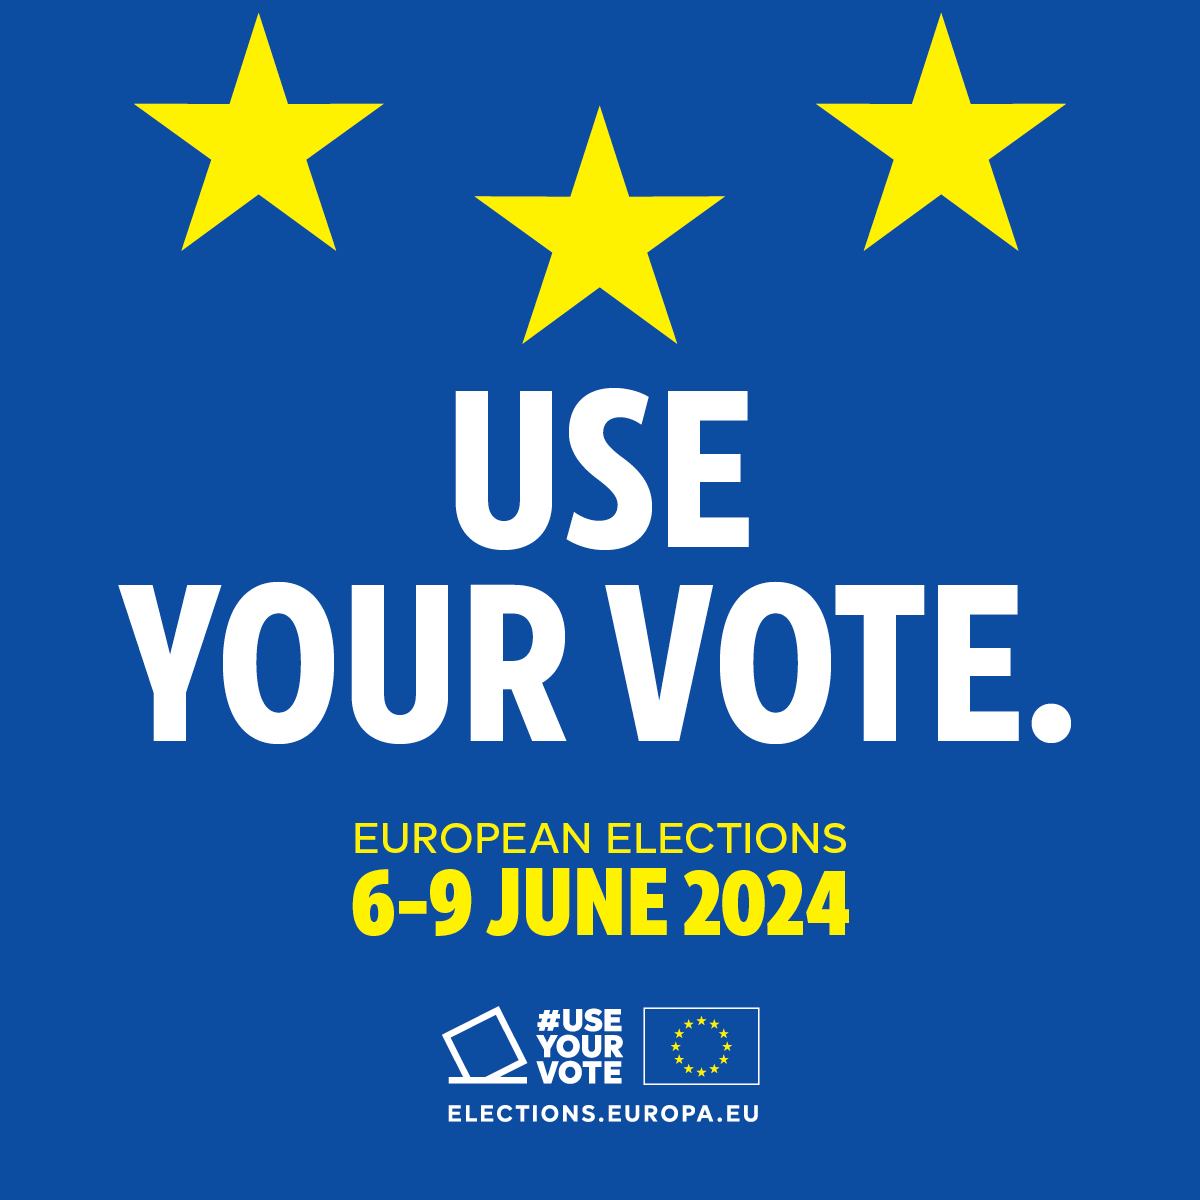 We should never take democracy for granted. #UseYourVote in the European elections, 6-9 June 2024!